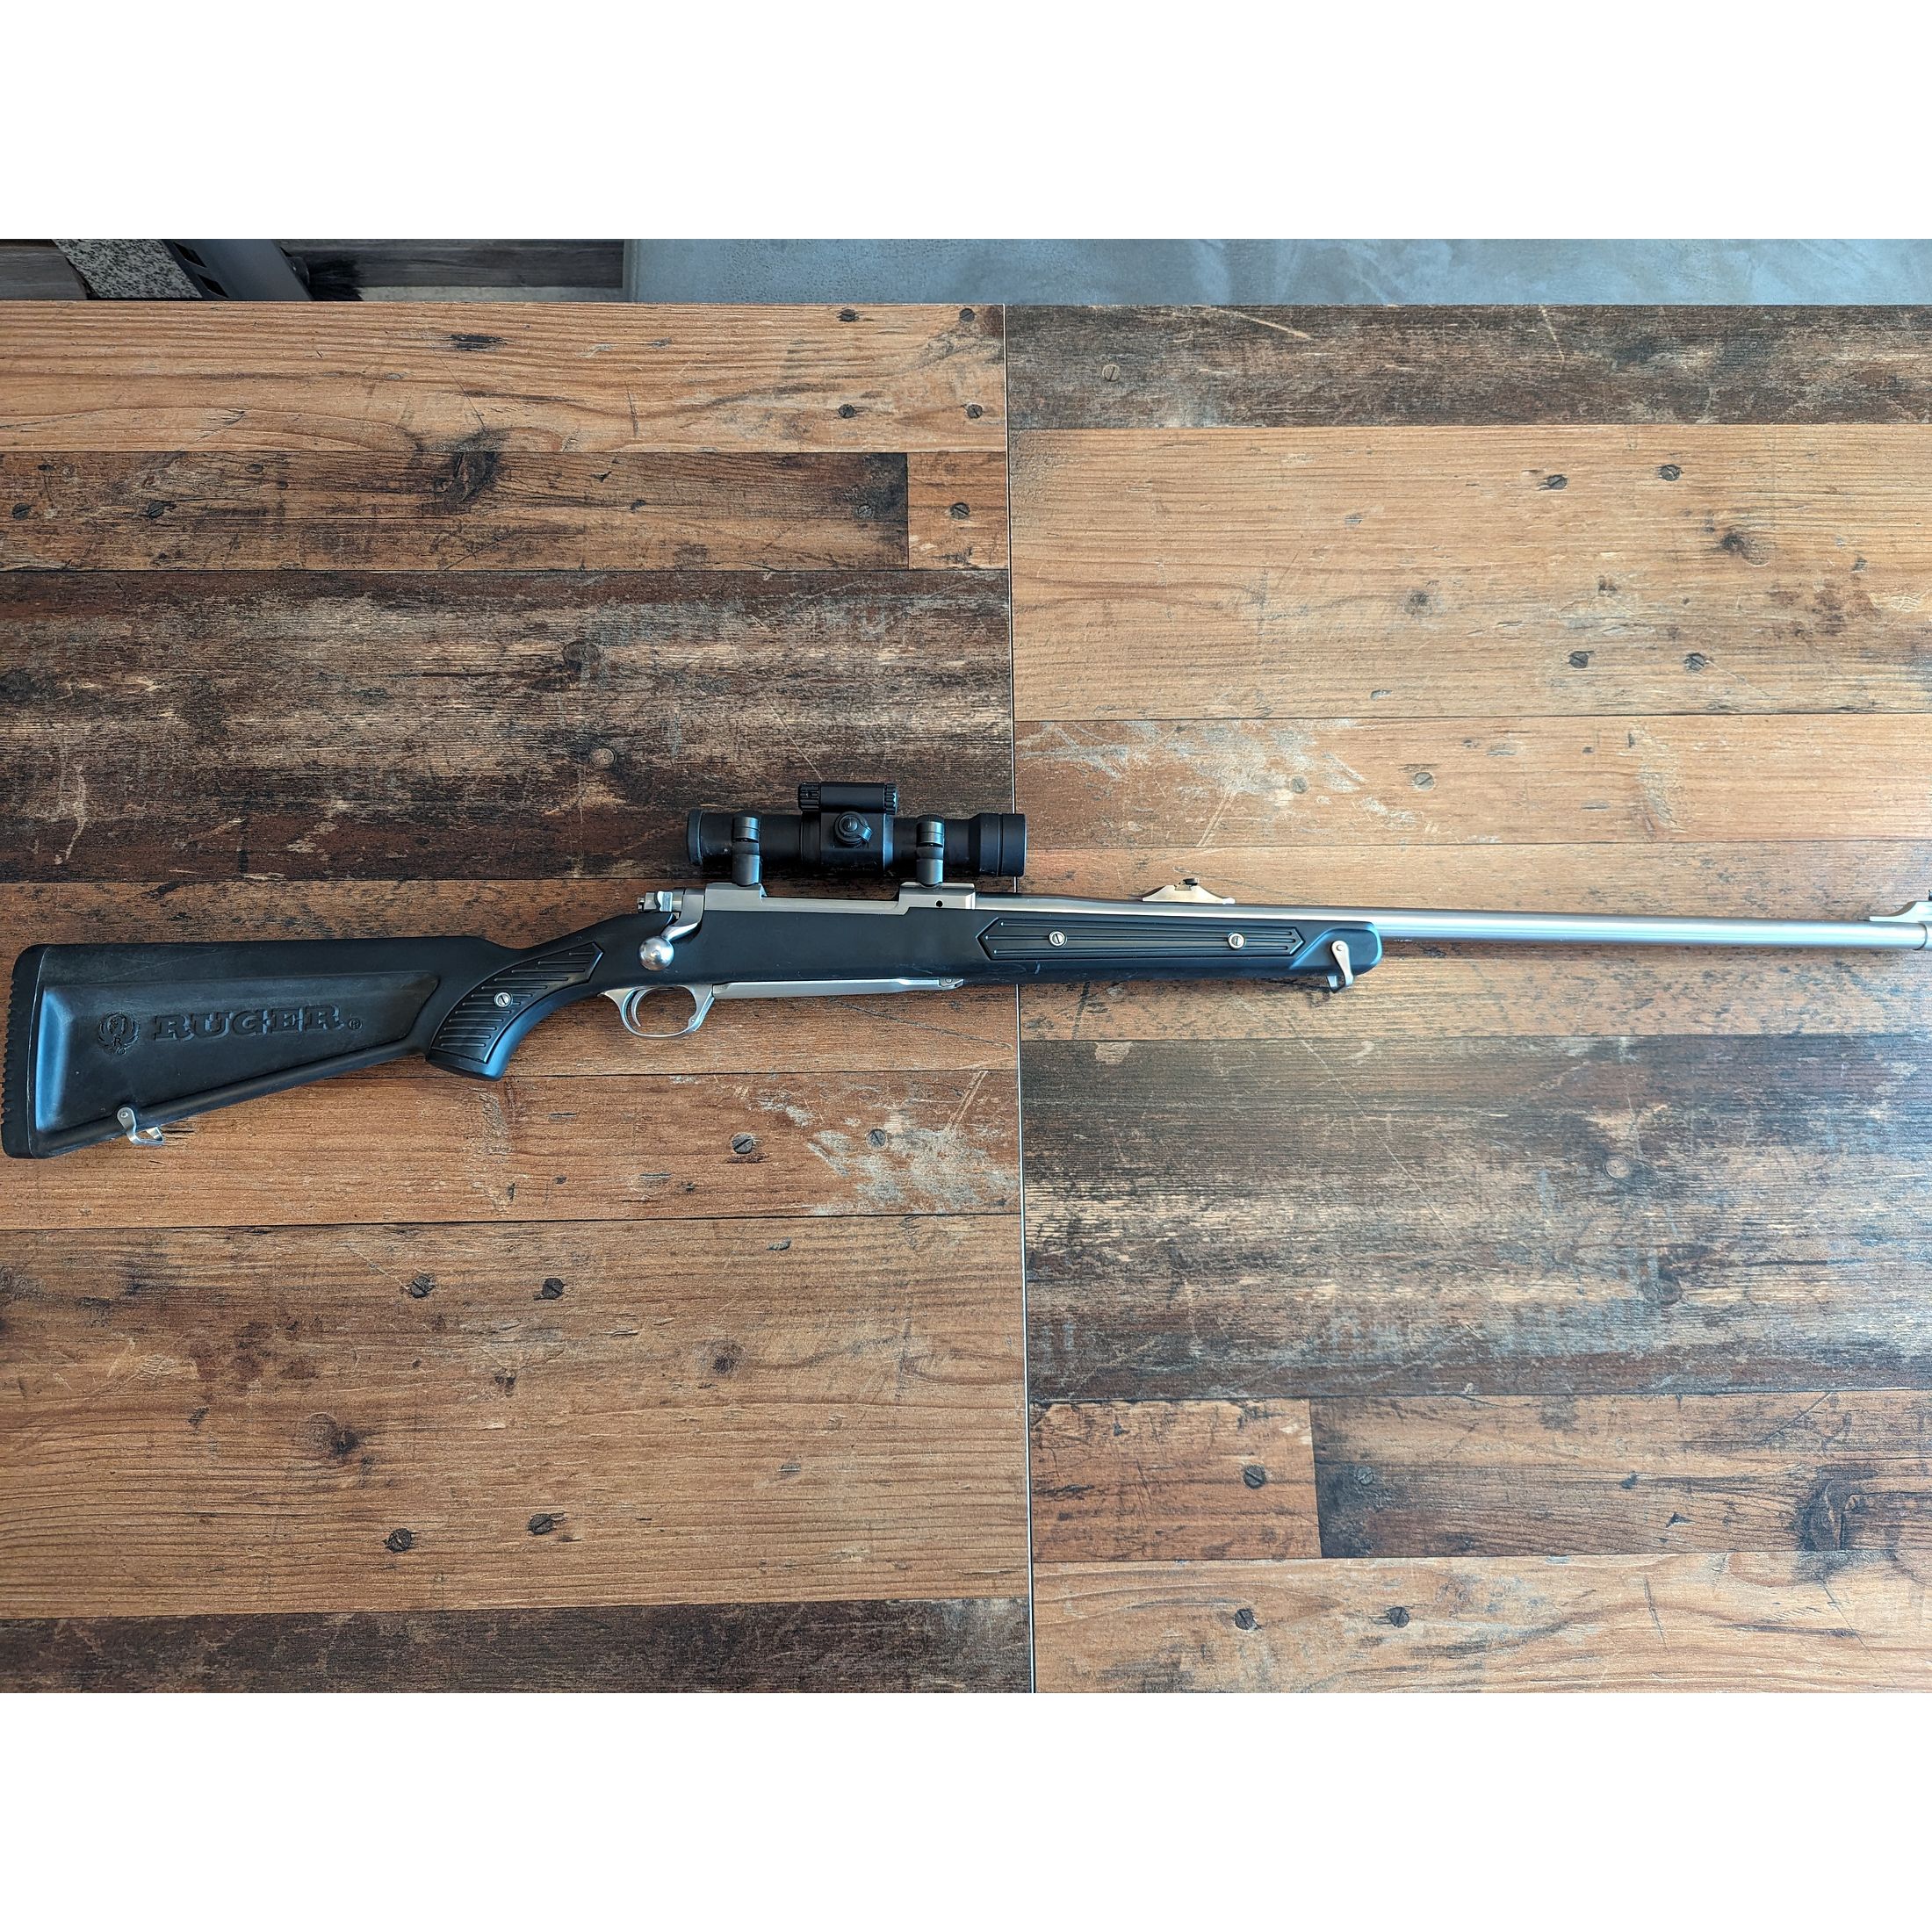 Repetierbüchse RUGER M77 MARK 2 